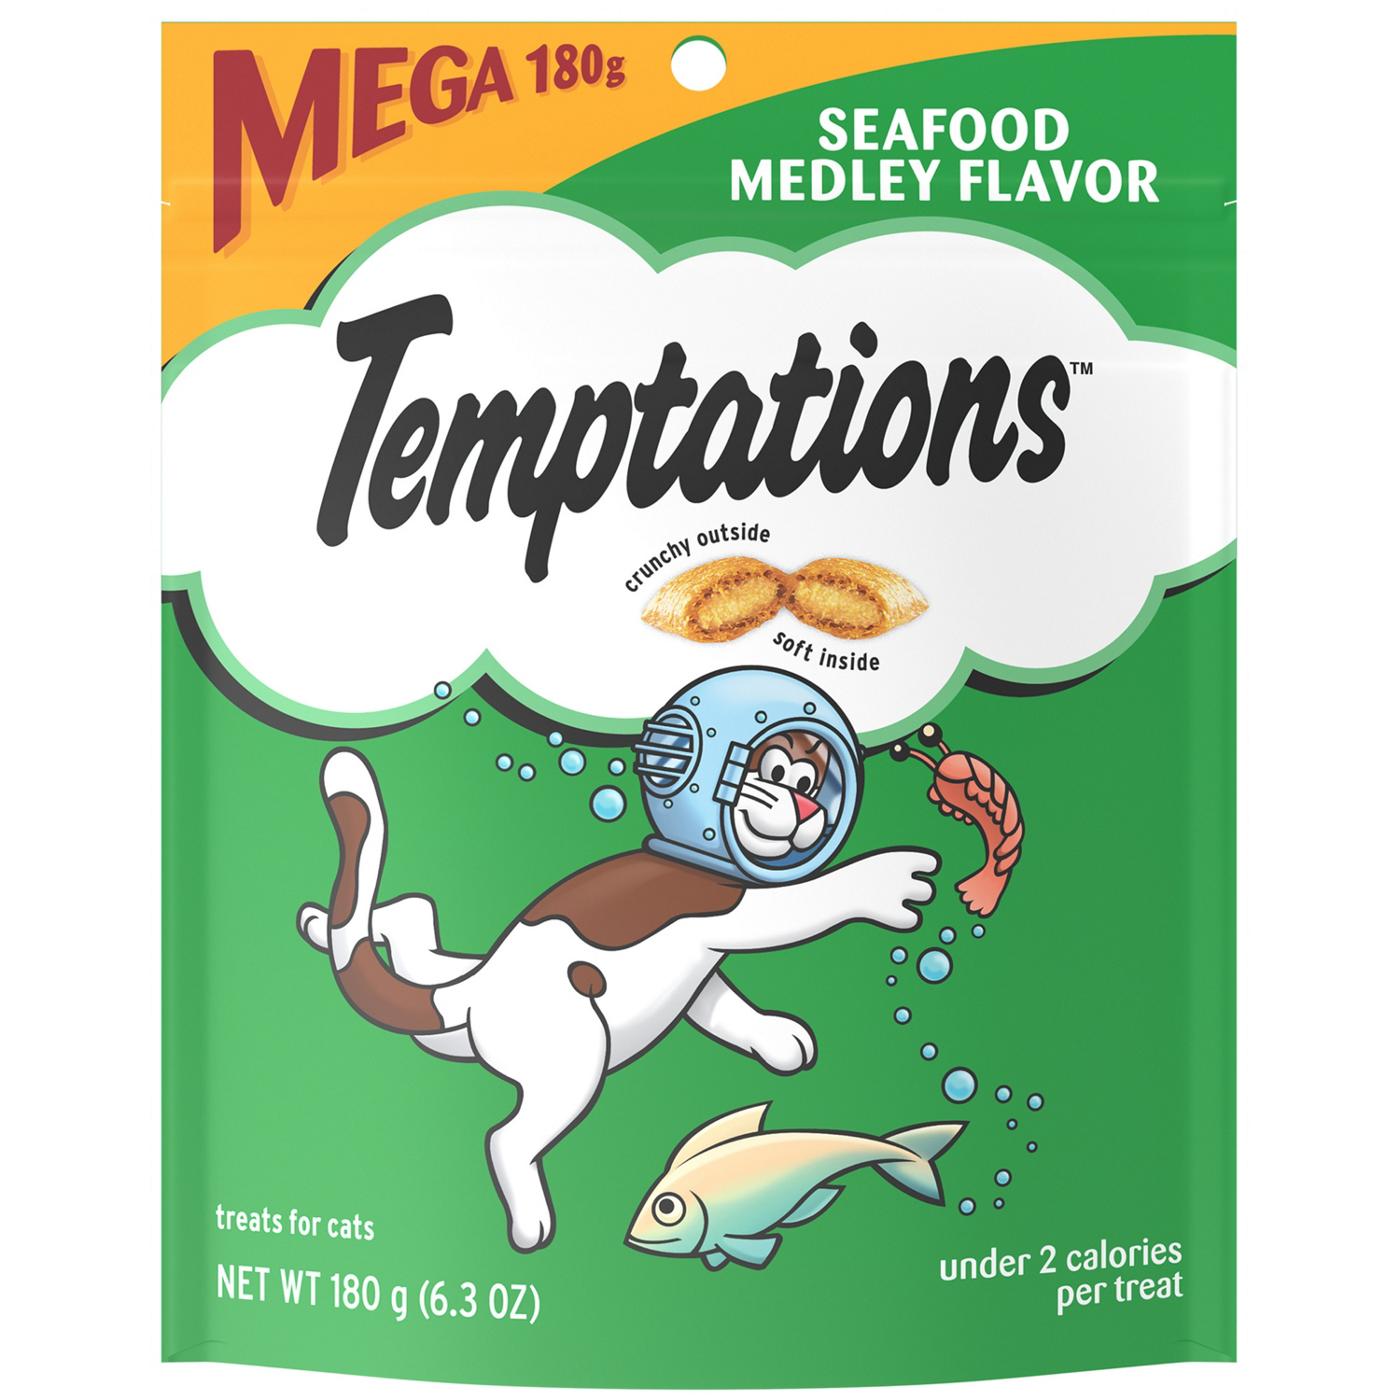 Temptations Classic Crunchy and Soft Cat Treats Seafood Medley Flavor; image 1 of 5